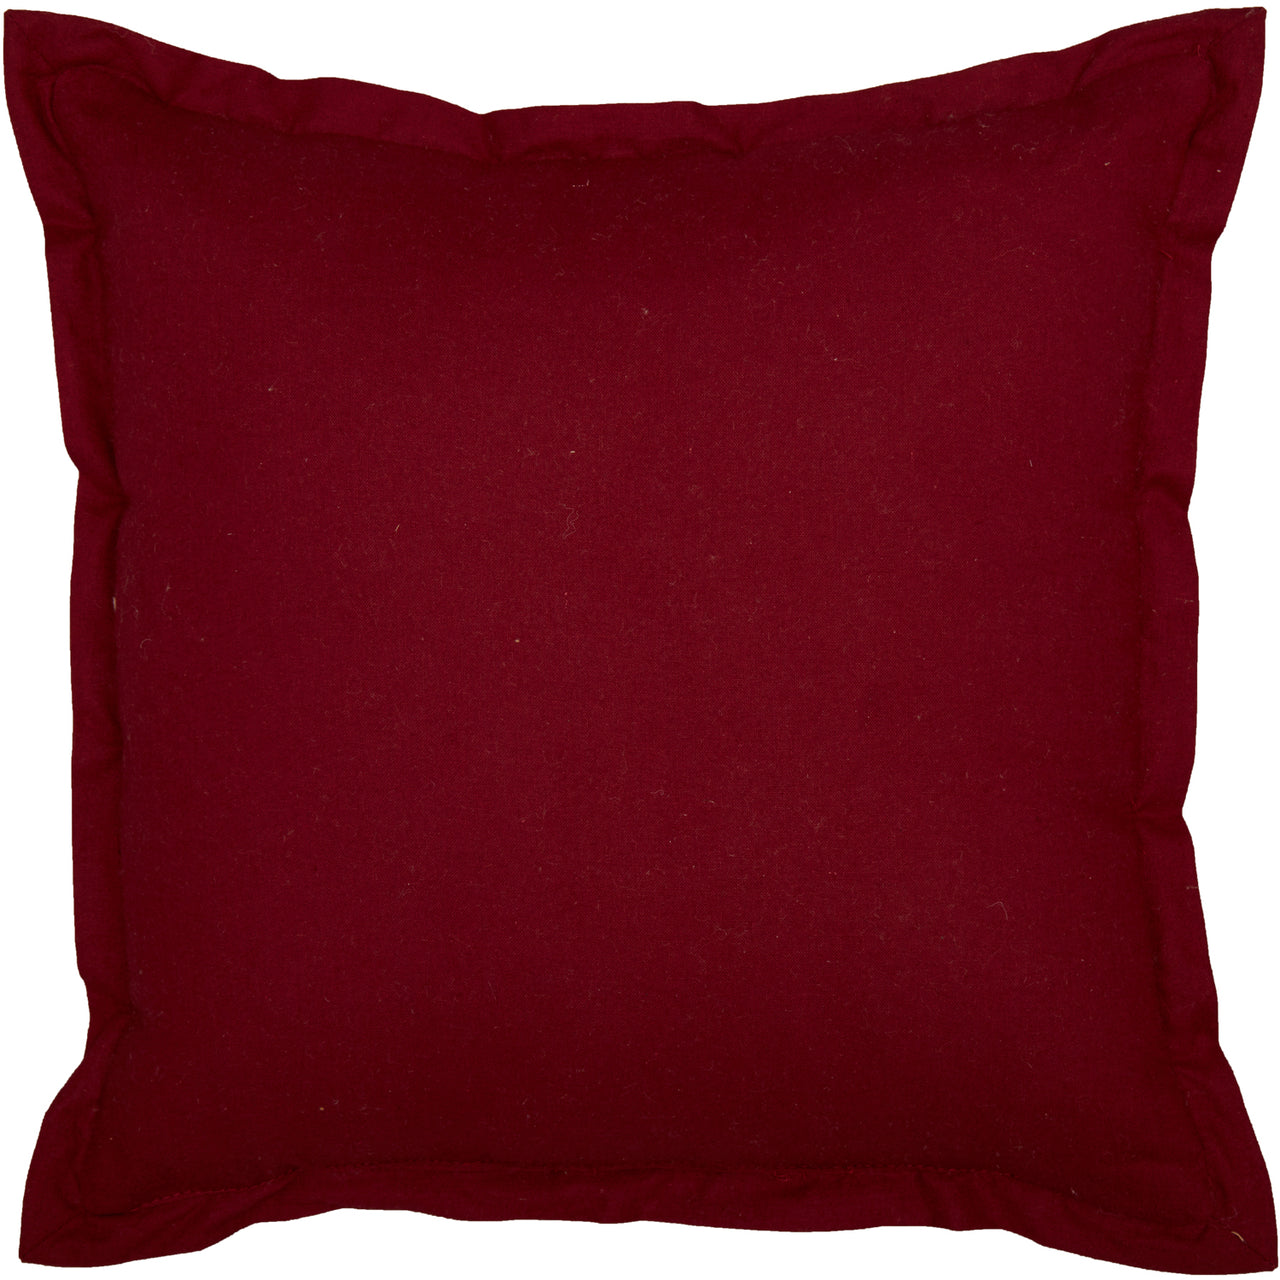 Ninepatch Star Quilted Pillow 12x12 VHC Brands